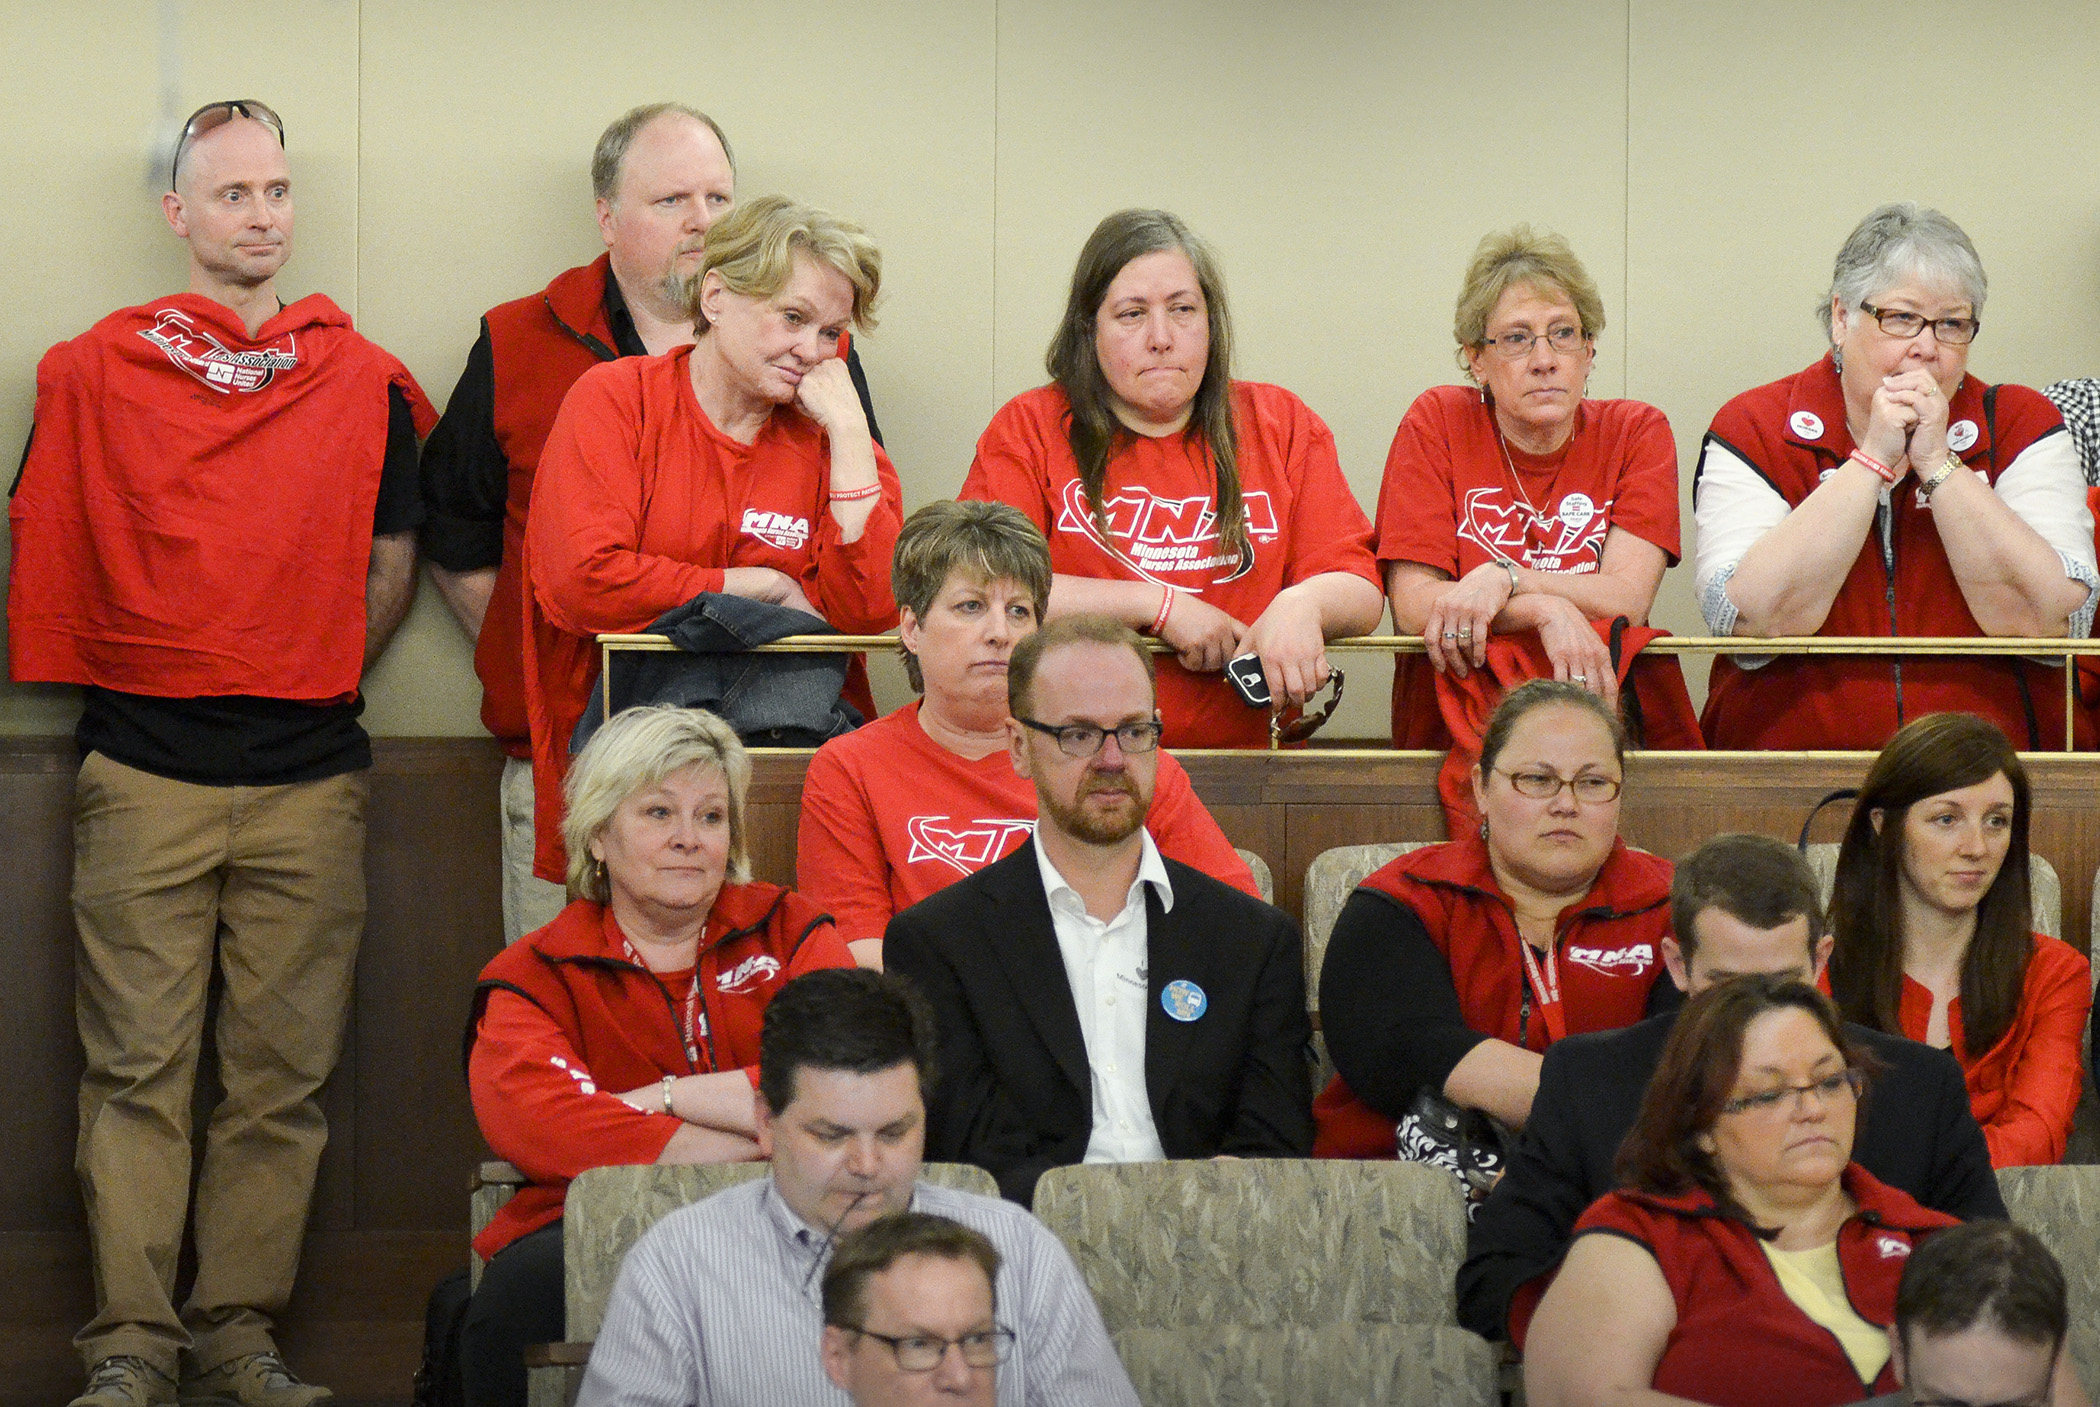 Donning red shirts, members of the Minnesota Nurses Association listen to testimony during the April 16 informational meeting of the House Health and Human Services Finance Committee on HF1654, a bill that would require hospitals to provide staffing levels consistent with nationally accepted standards. Photo by Andrew VonBank